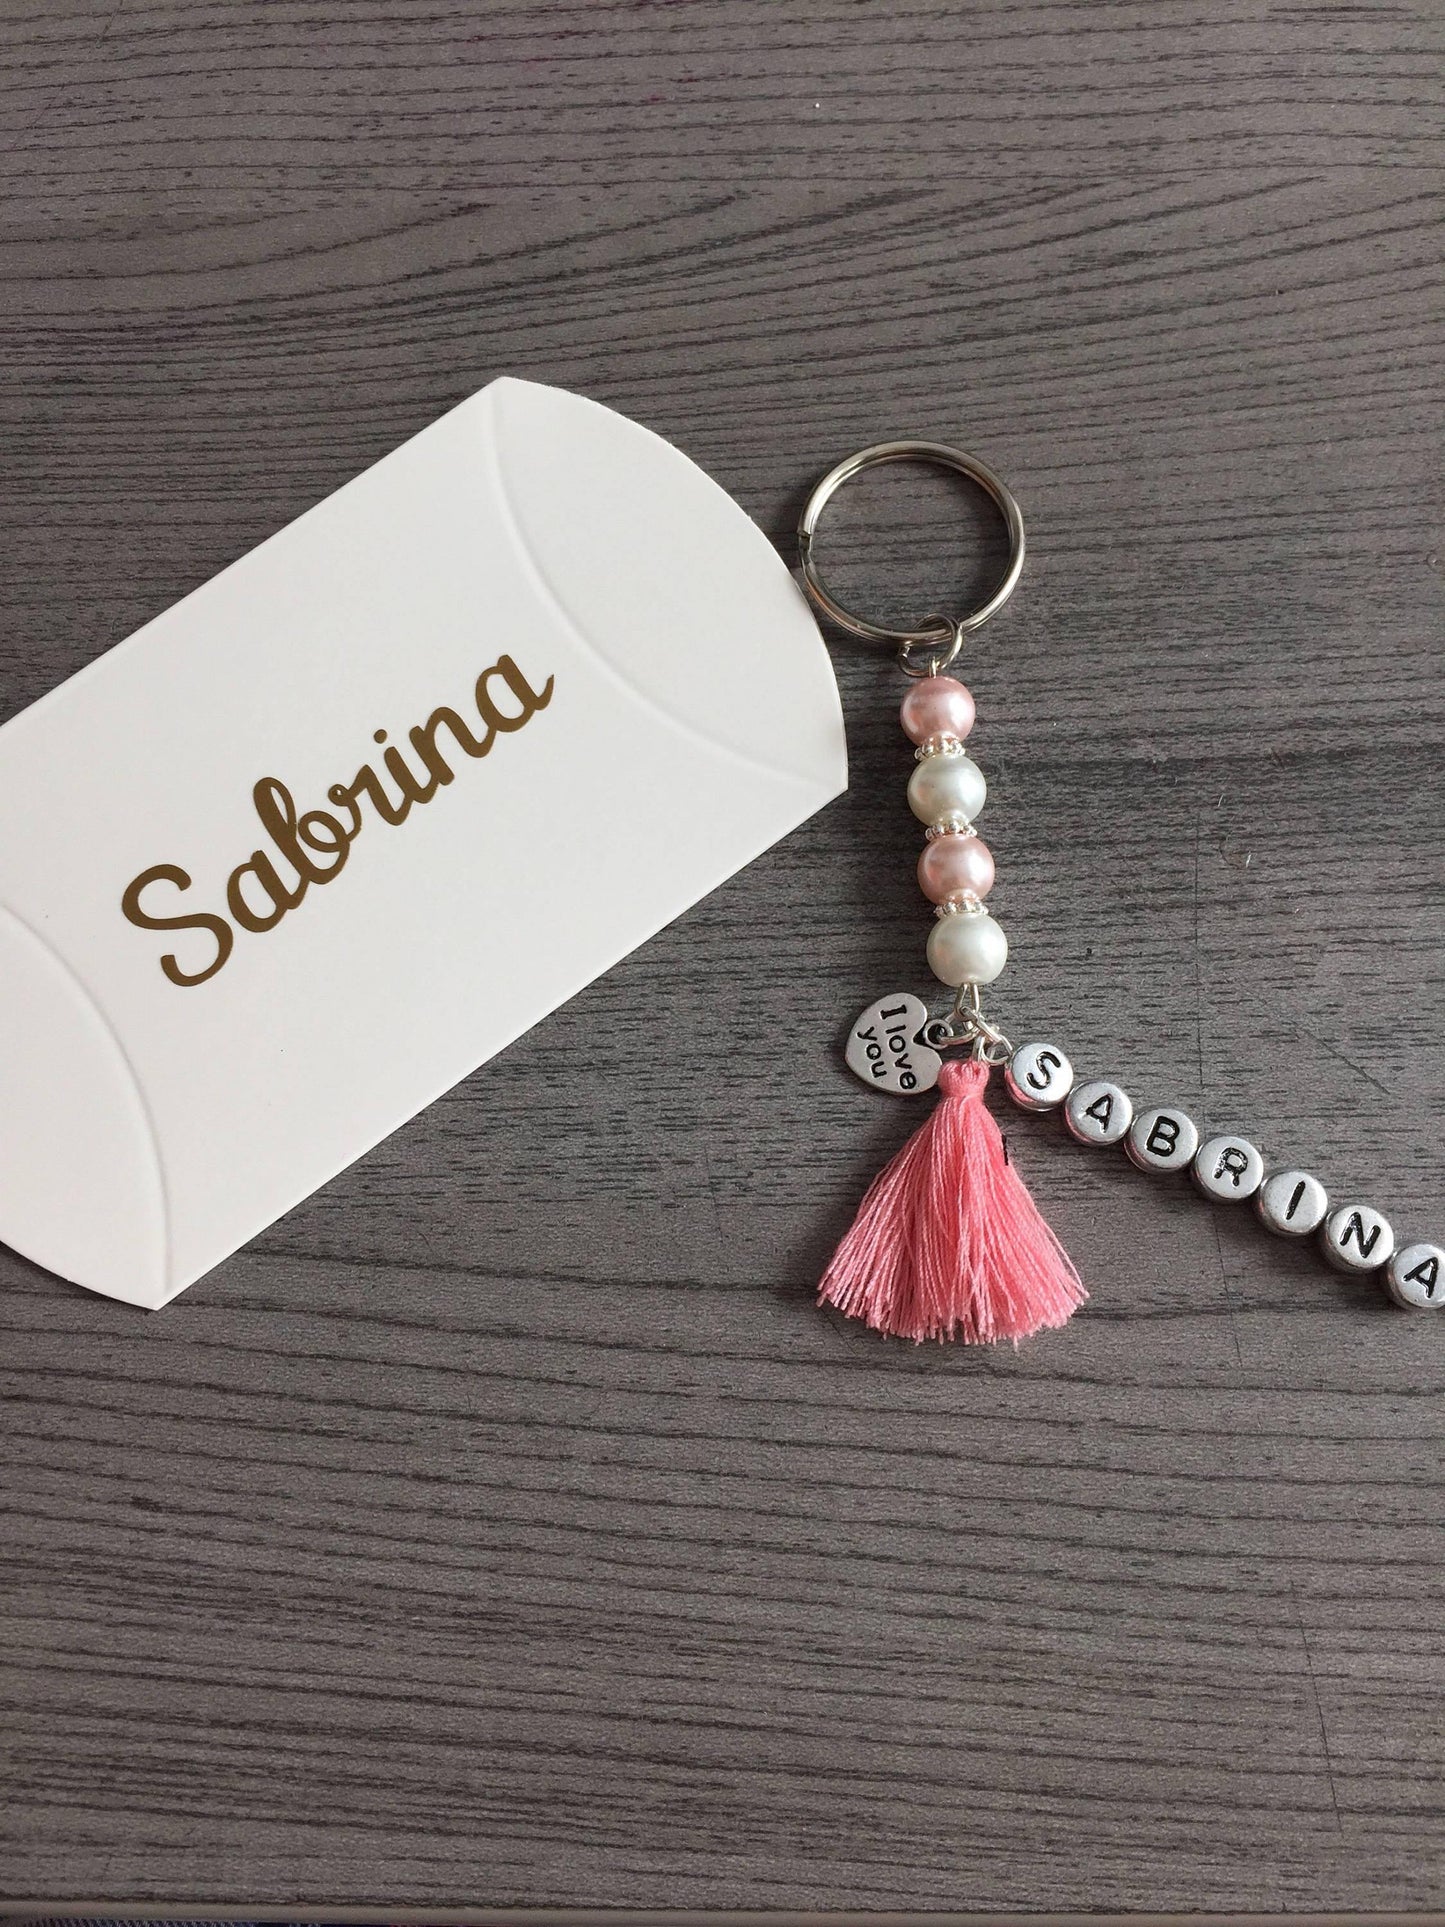 Personalized pearled keychain (incl box) - Unique Tasbihs & Gifts